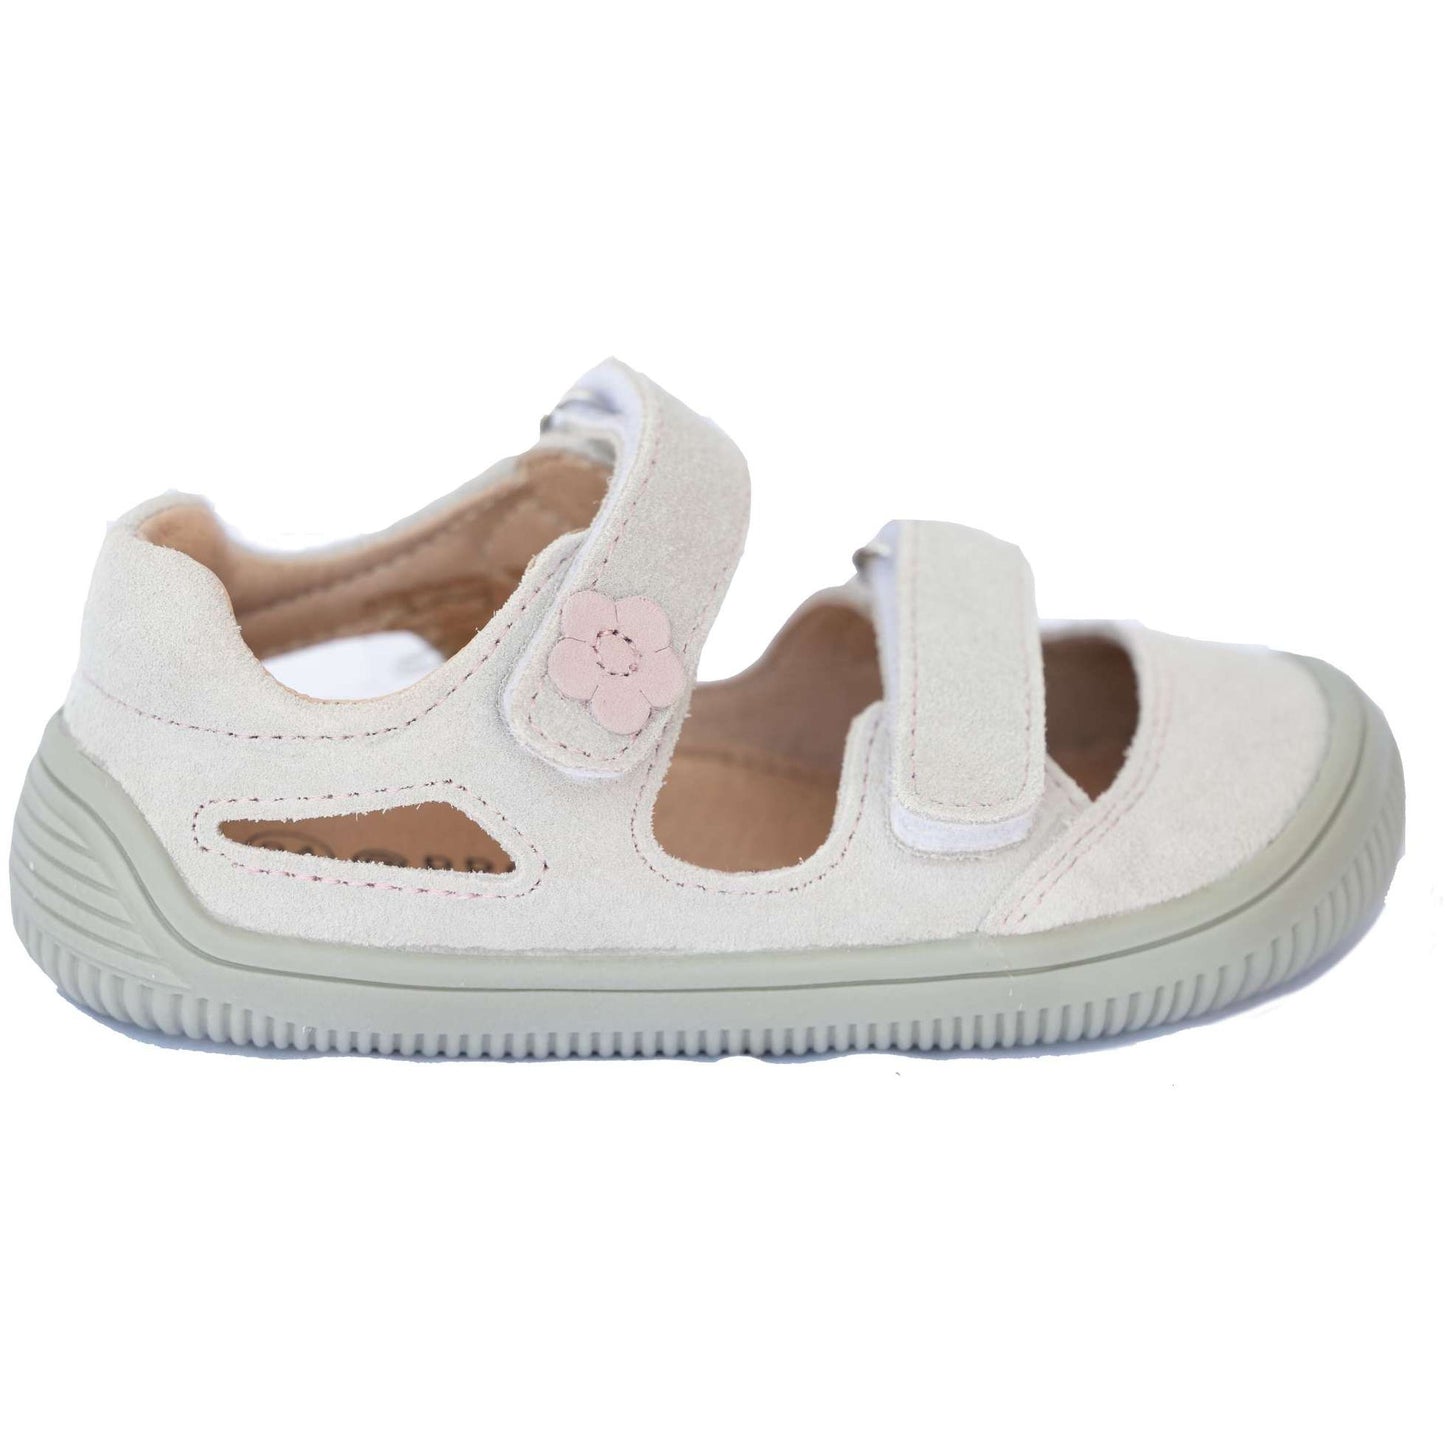 Barefoot toddler sneaker MERYL gris from PROTETIKA brand is suitable for narrow to normal feet. The removable insole is flat. The upper is suede leather.